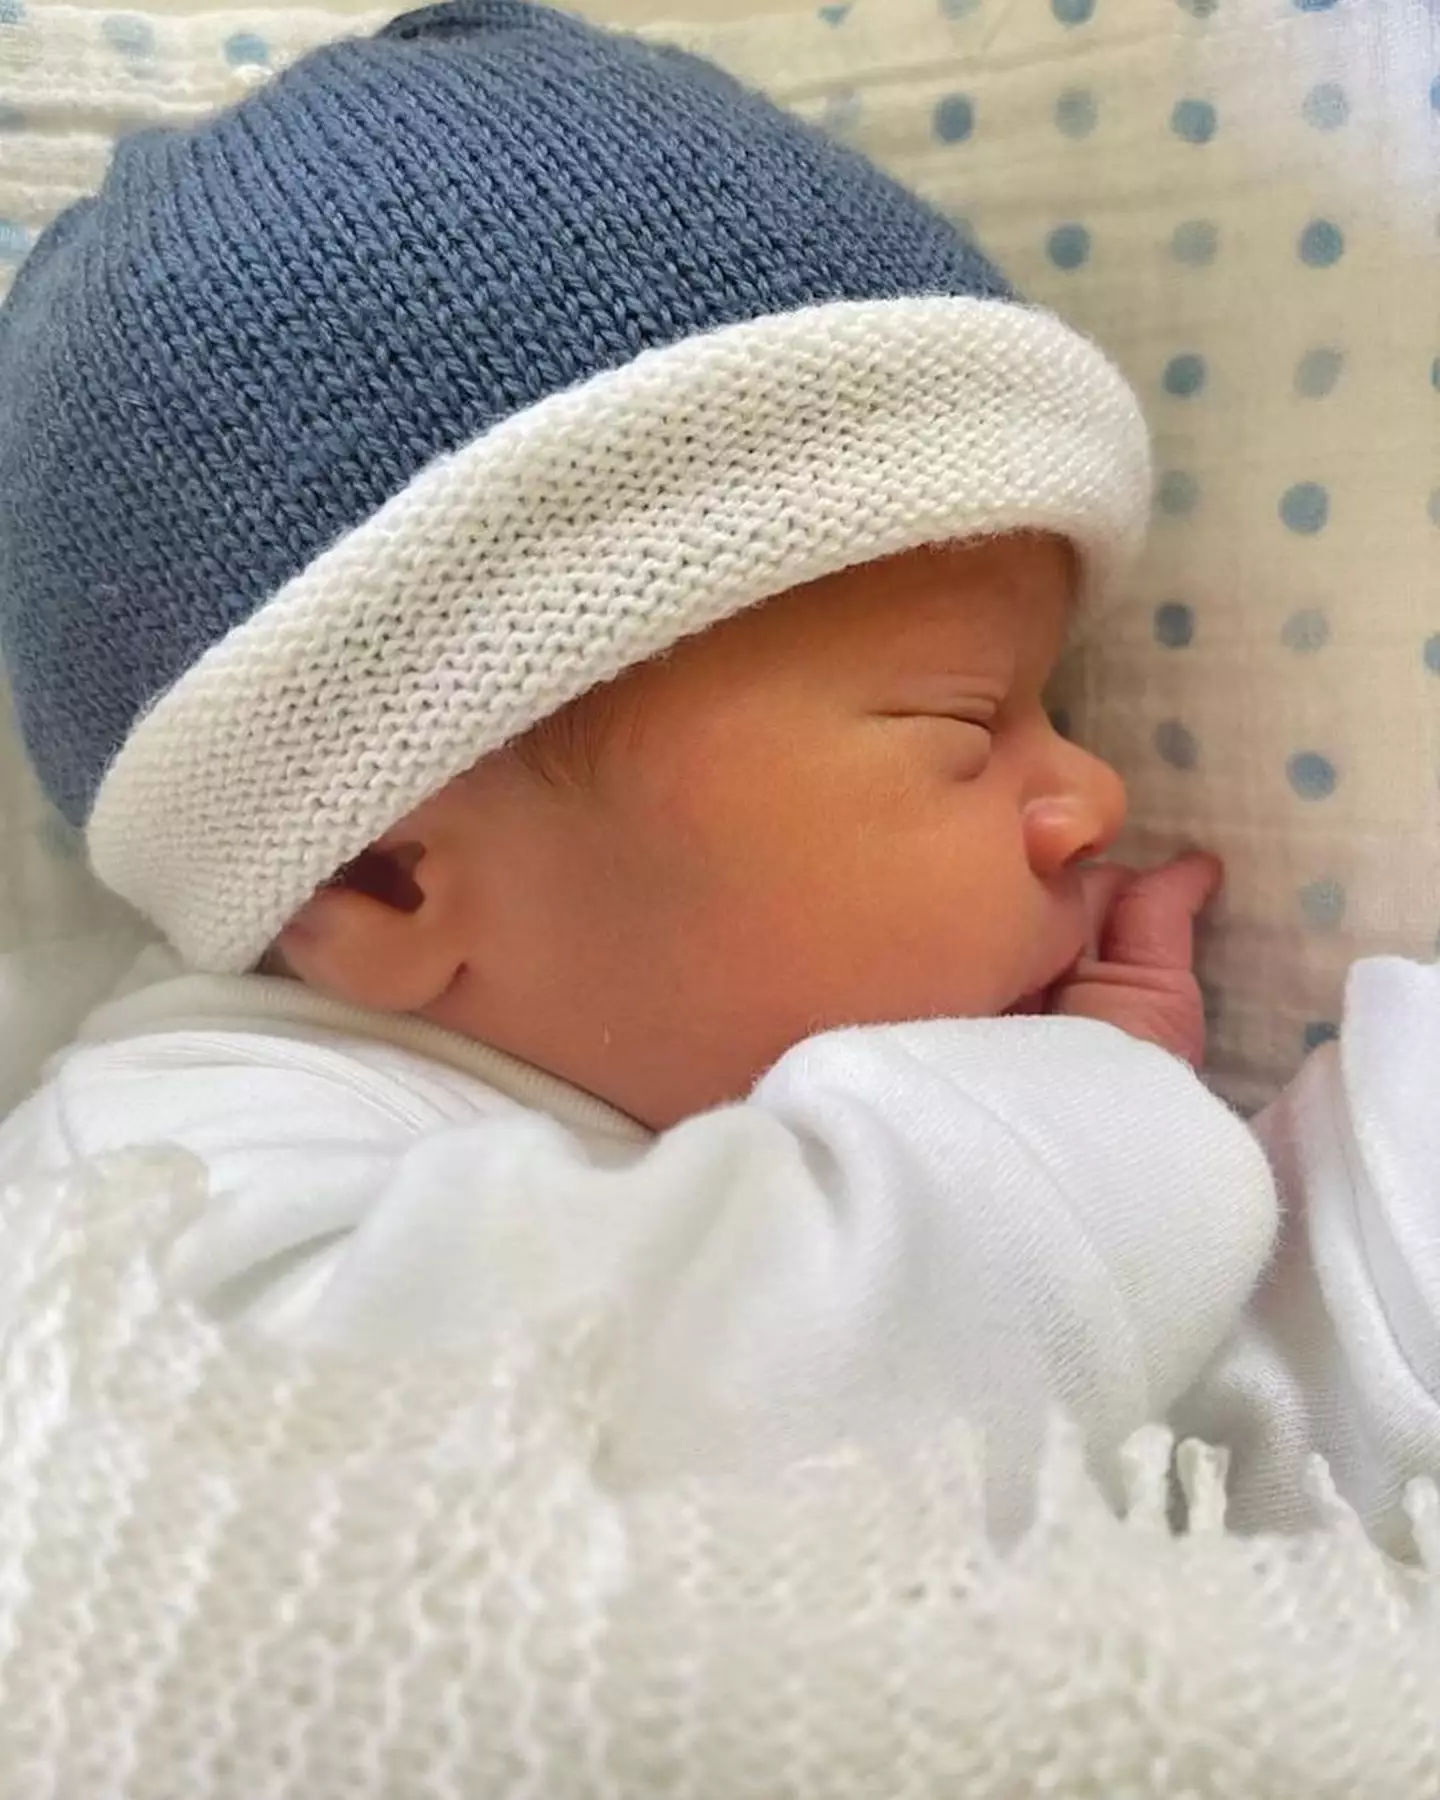 The couple welcomed their second son on 30 May.